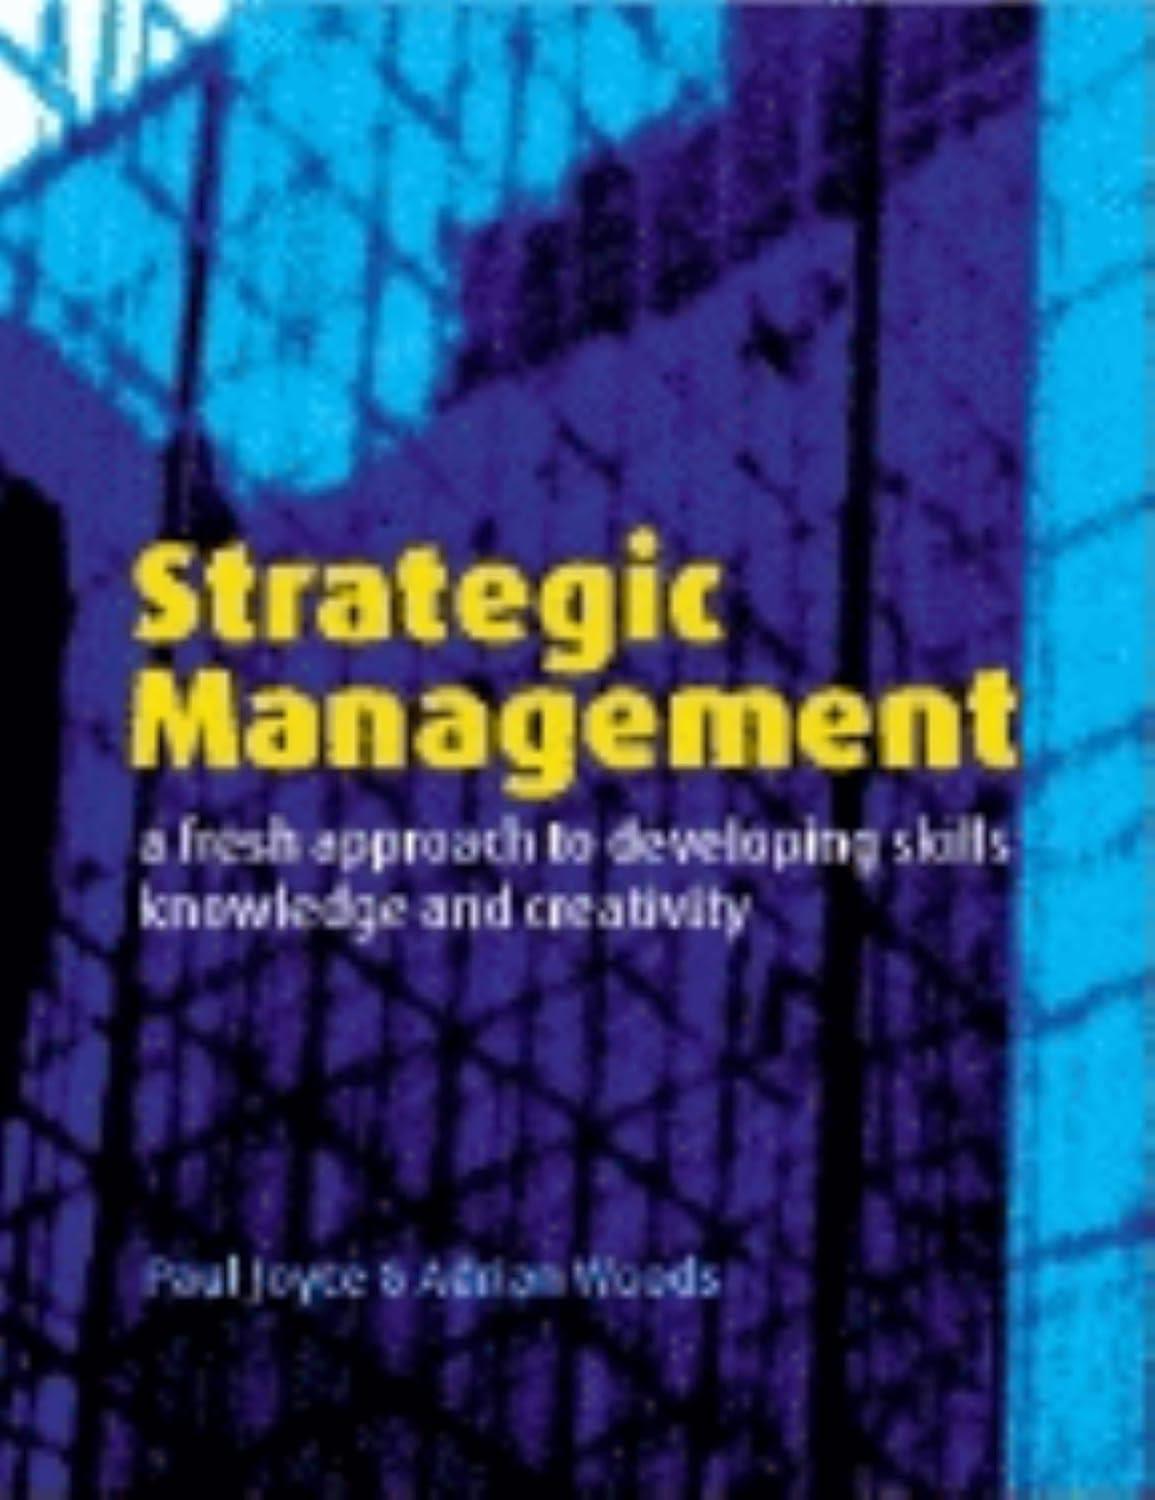 Strategic Management A Fresh Approach To Developing Skill  Knowledge And Creativity